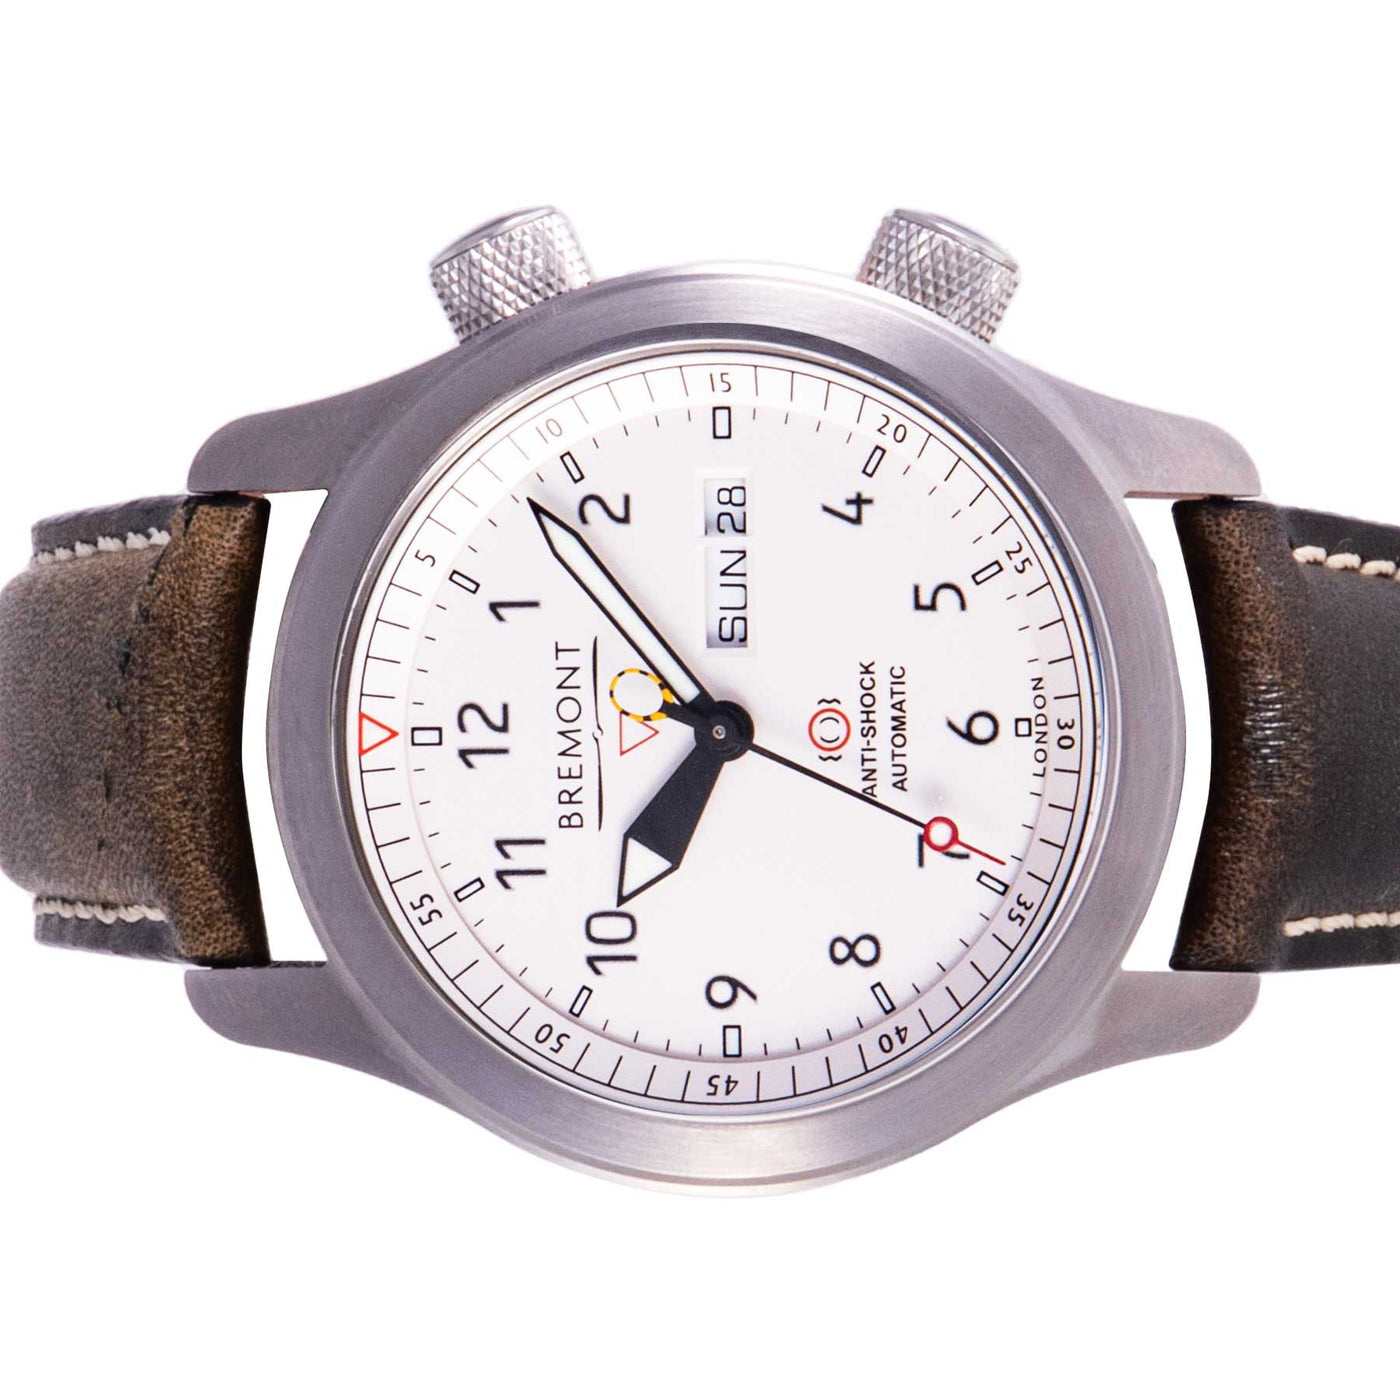 Bremont Altitude Martin Baker MBII MBII WH OR | Timepiece360